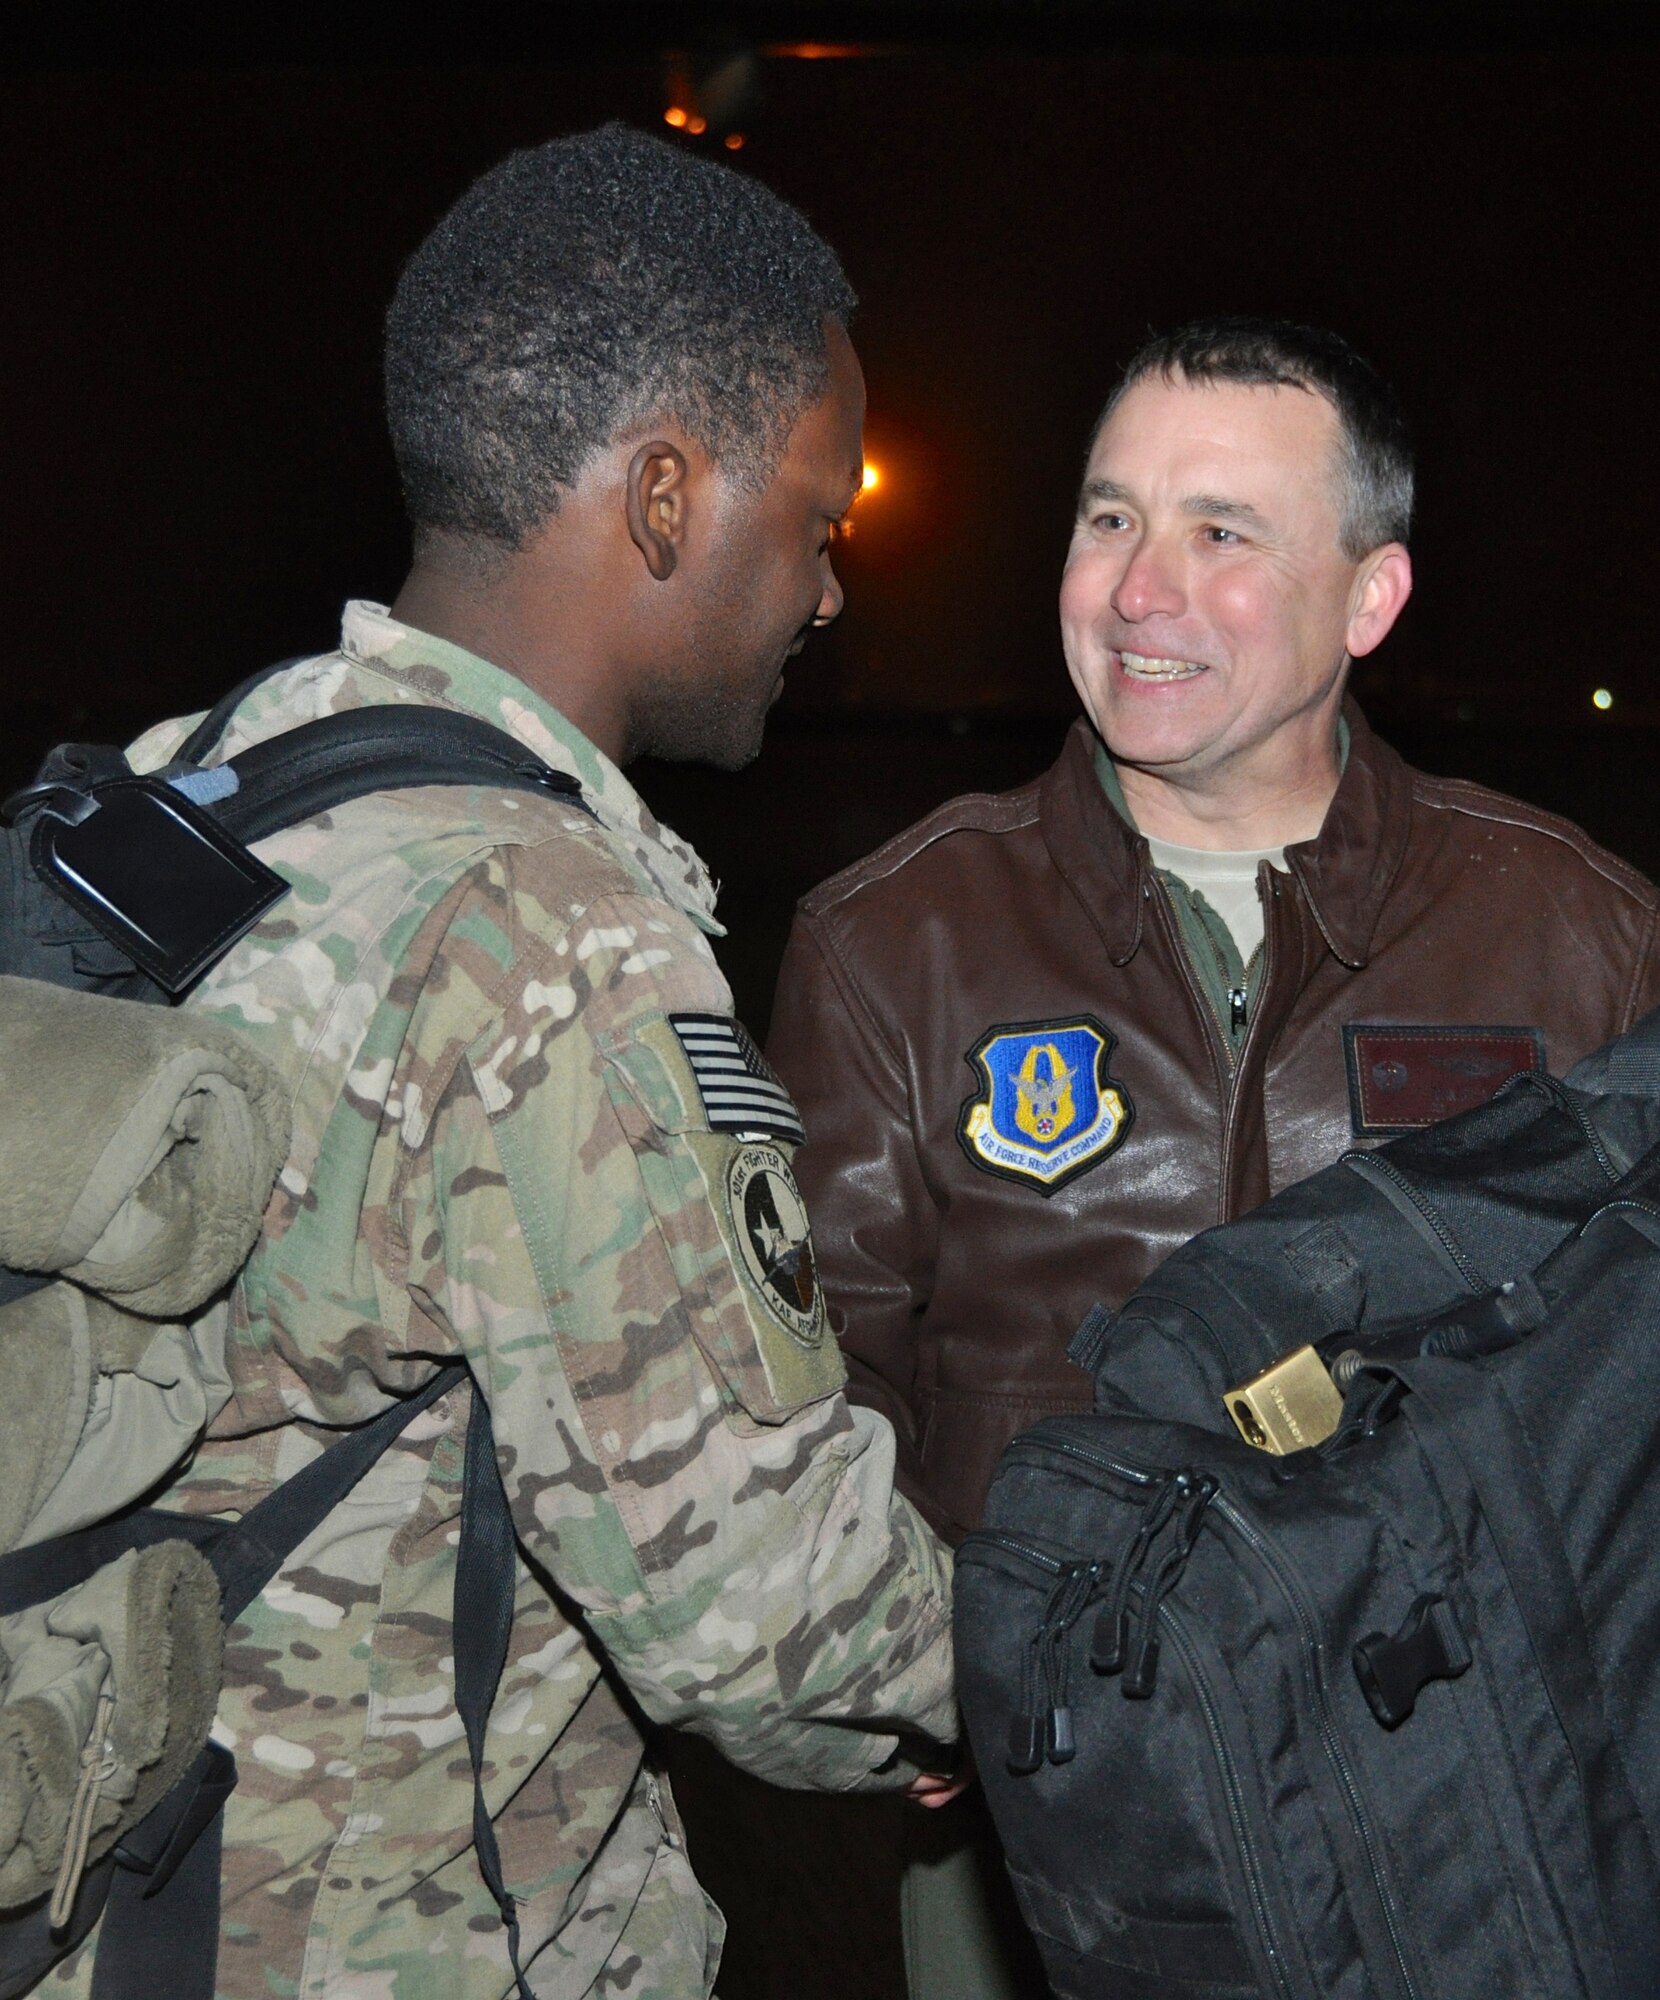 Col. John Breazeale, 301st Fighter Wing commander, welcomes returning Airmen from their recent deployment to Afghanistan. Reservists from the 301st Fighter Wing returned to chilly temperatures and a warm welcome home. Family members and friends displayed signs anticipating arrival of those deployed in support of Operation Enduring Freedom. (U.S. Air Force photo/MSgt Josh Woods)